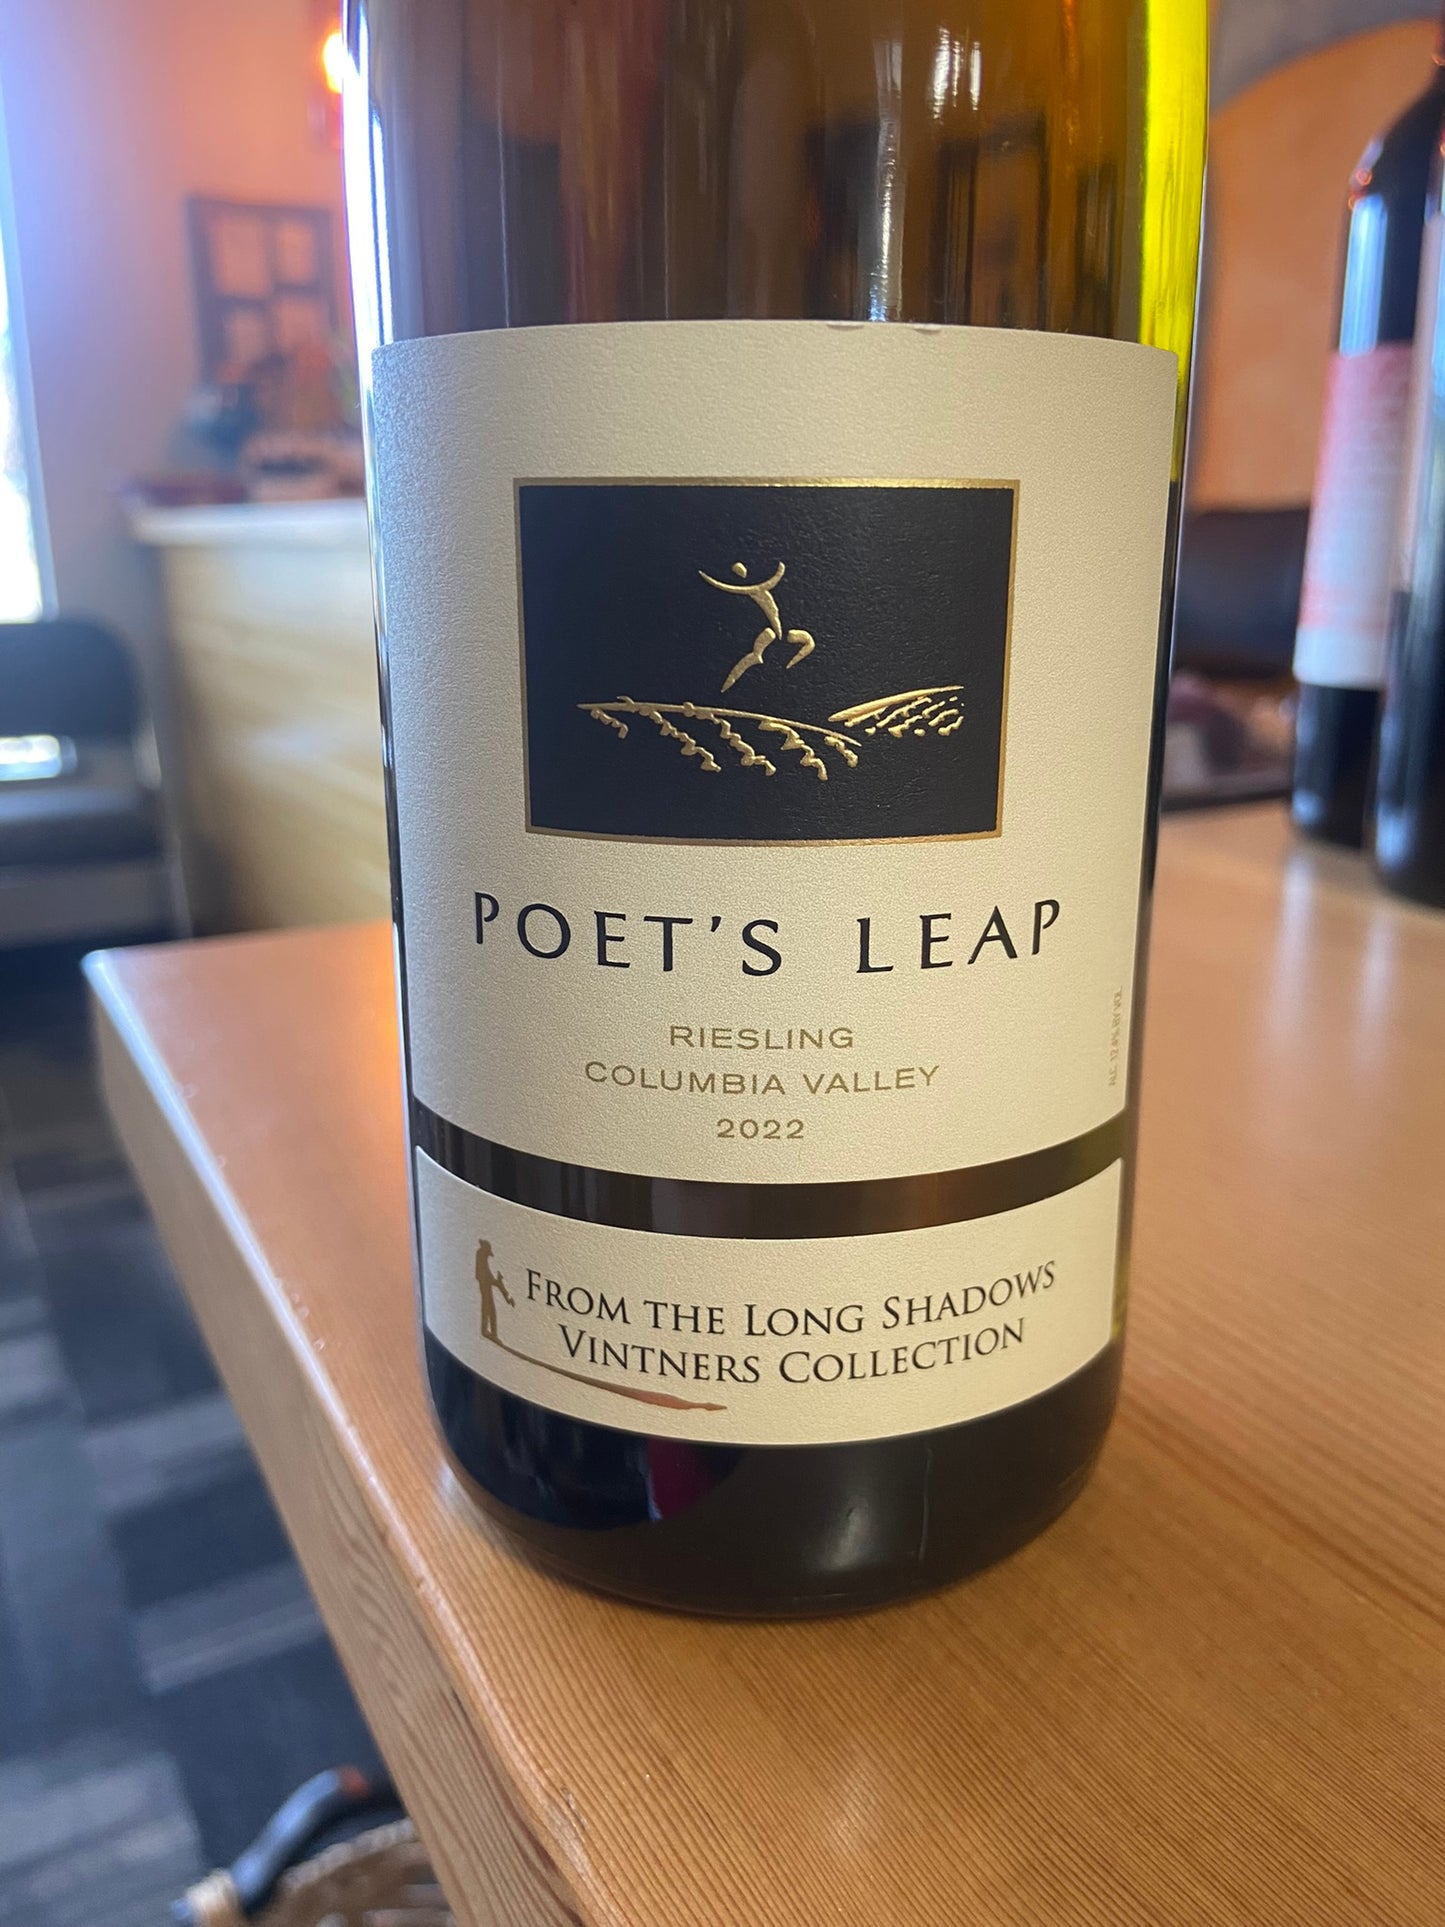 LONG SHADOWS 2022 Riesling 'Poet's Leap' (Columbia Valley, WA)